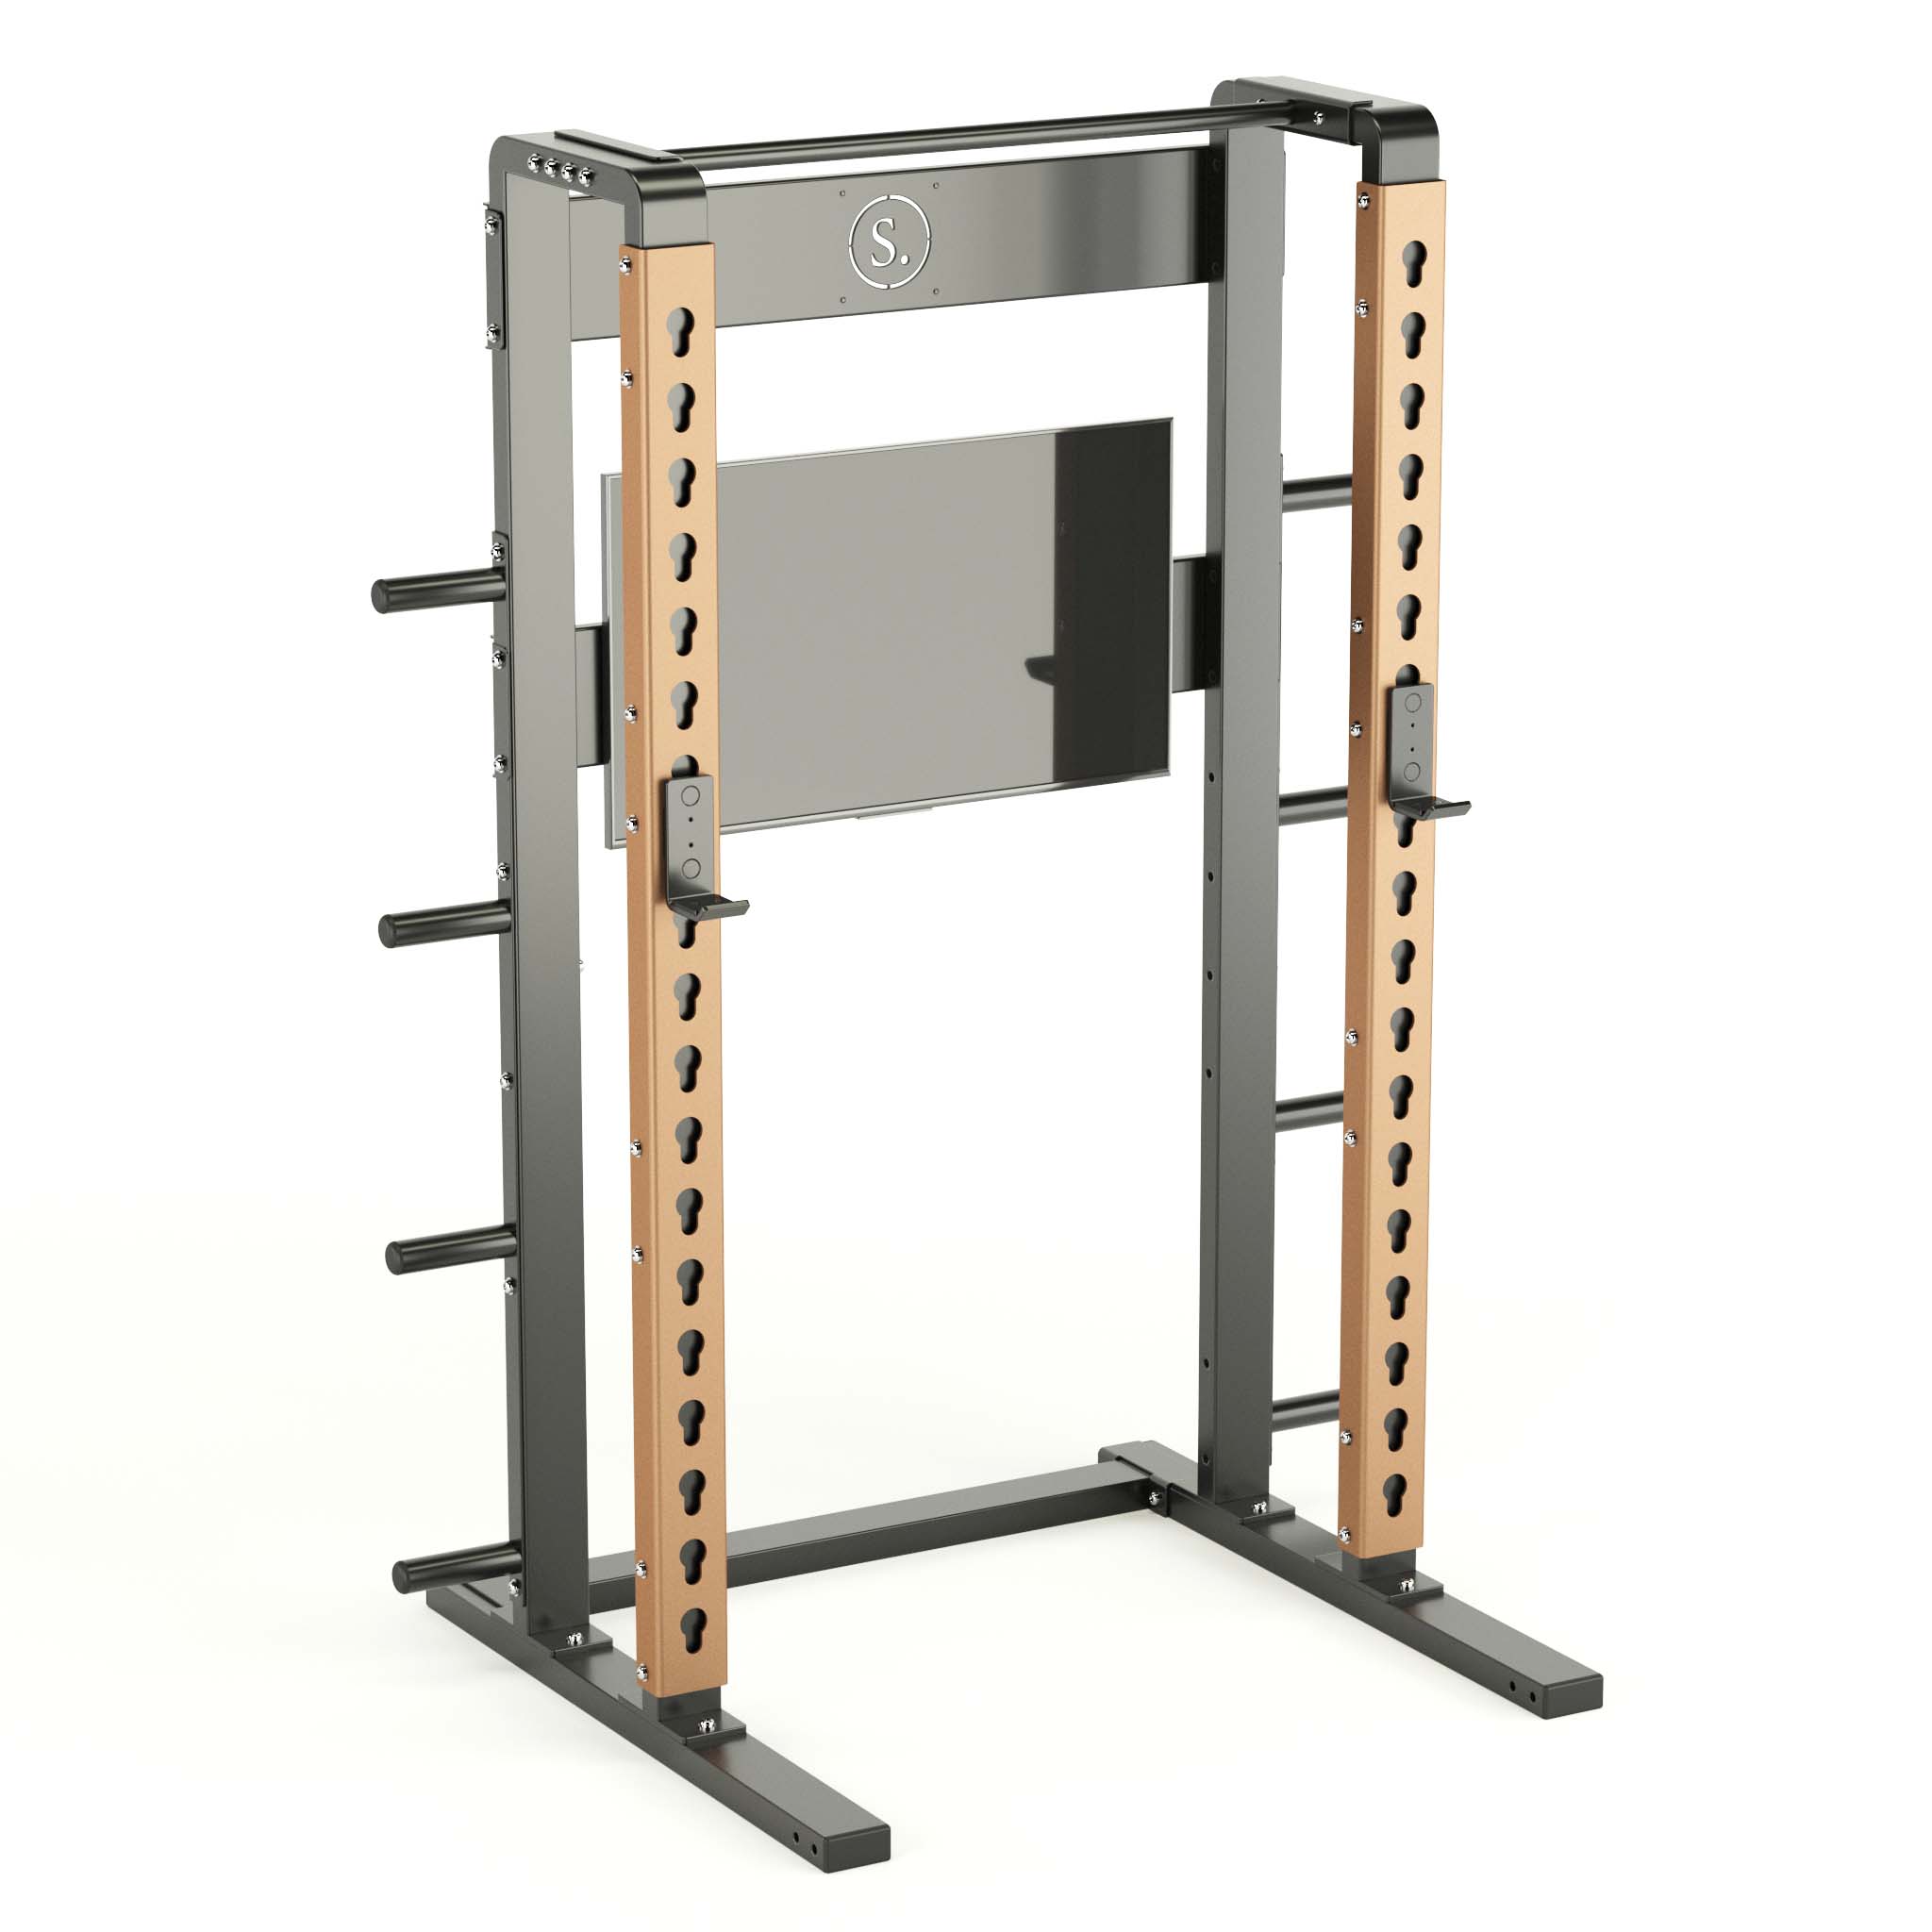 Solo Squat Rack Plus with weight horns in bronze